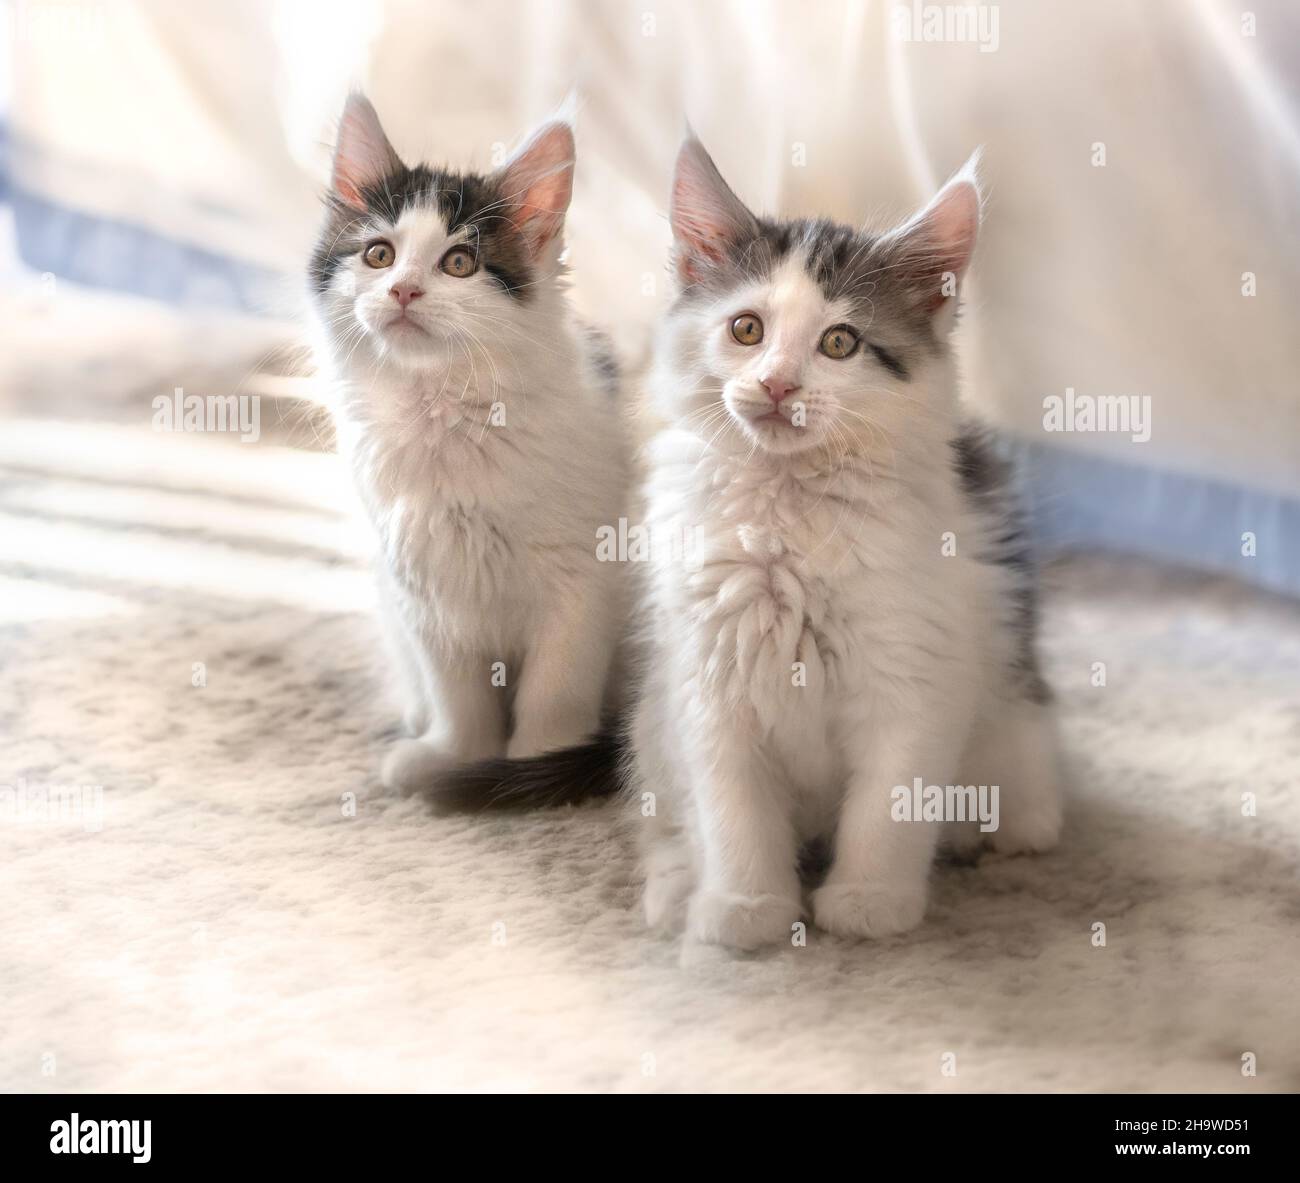 Pair of  curious, alert 9 week old, Maine Coon Cat kittens playing on carpet Stock Photo